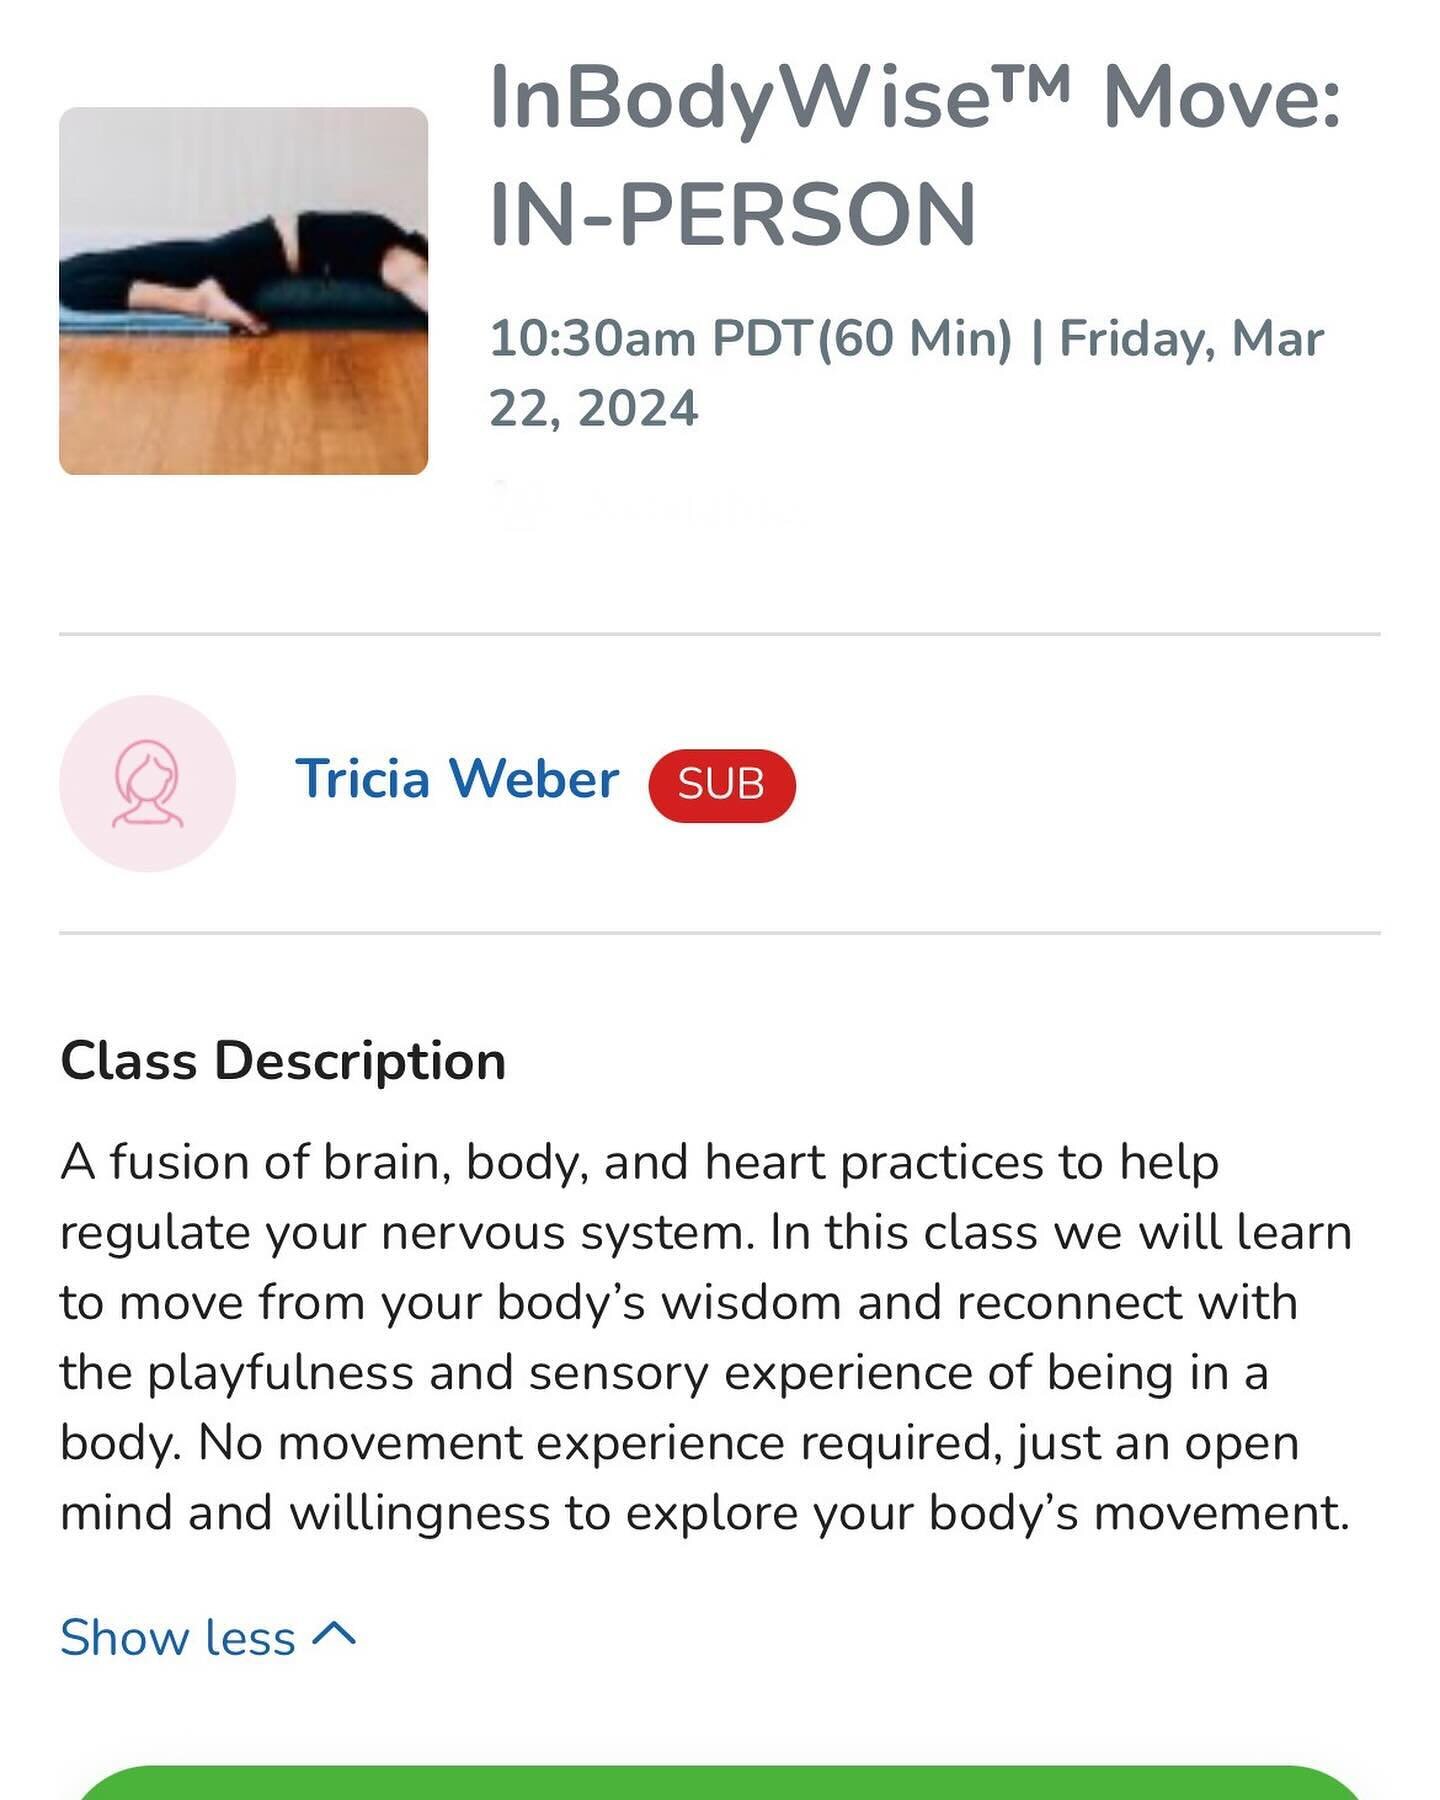 TWO Opportunities to move with me tomorrow (Friday, 3/22) at @thriveyogaoc !! 

10:30am INBODY WISE MOVE (Subbing for @Rachel Lundberg): 
A fusion of brain, body, and heart practices to help regulate your nervous system.
In this class we will learn t